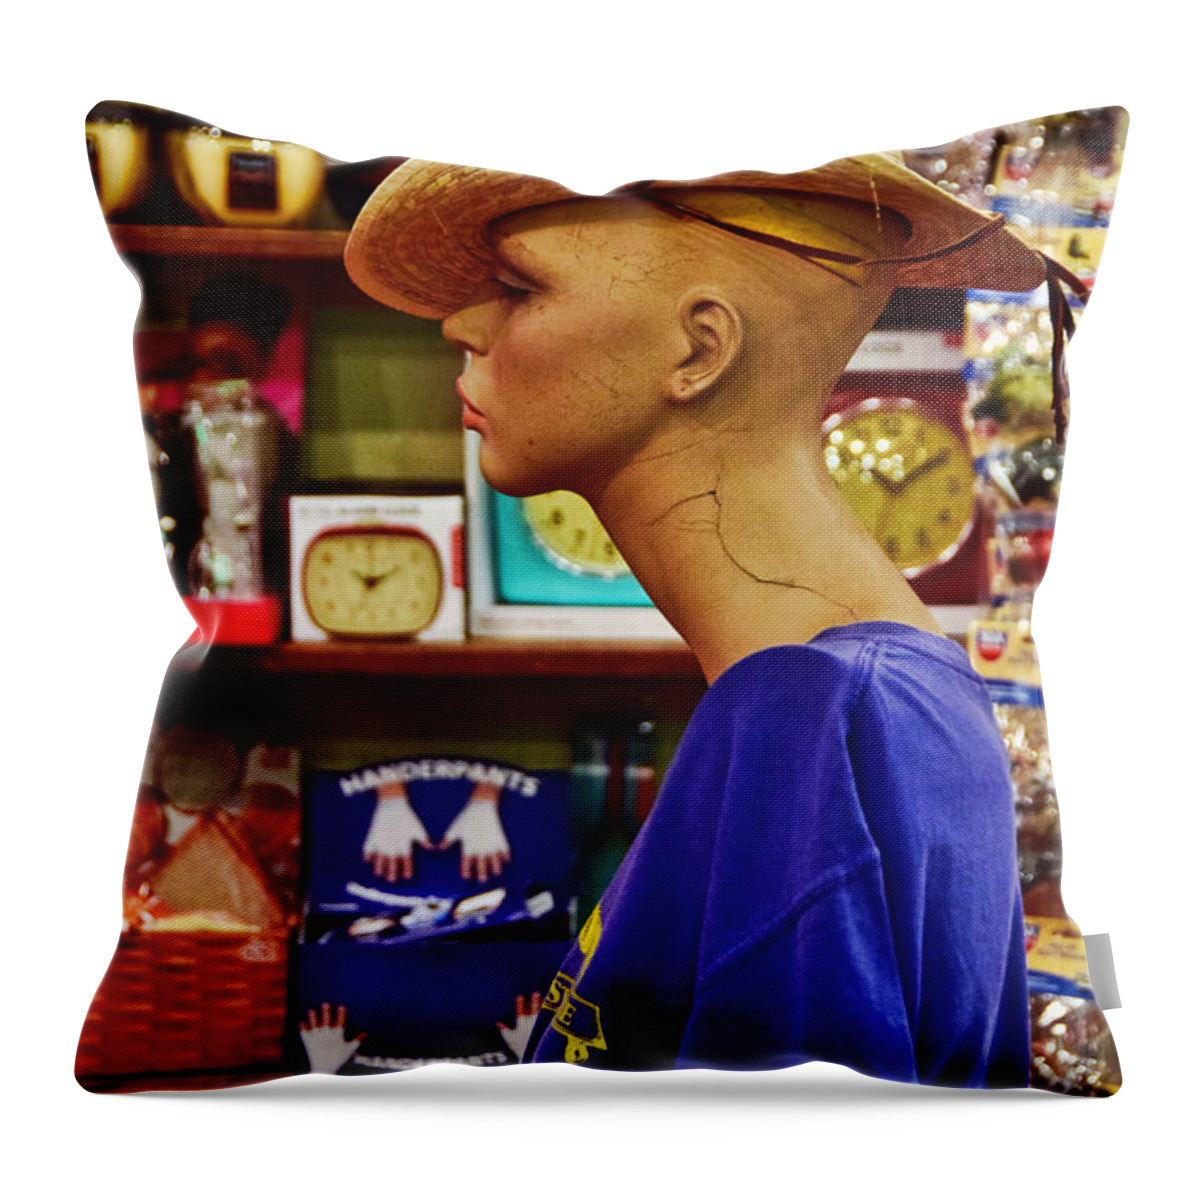 Handerpants Throw Pillow featuring the photograph Handerpants by Skip Hunt